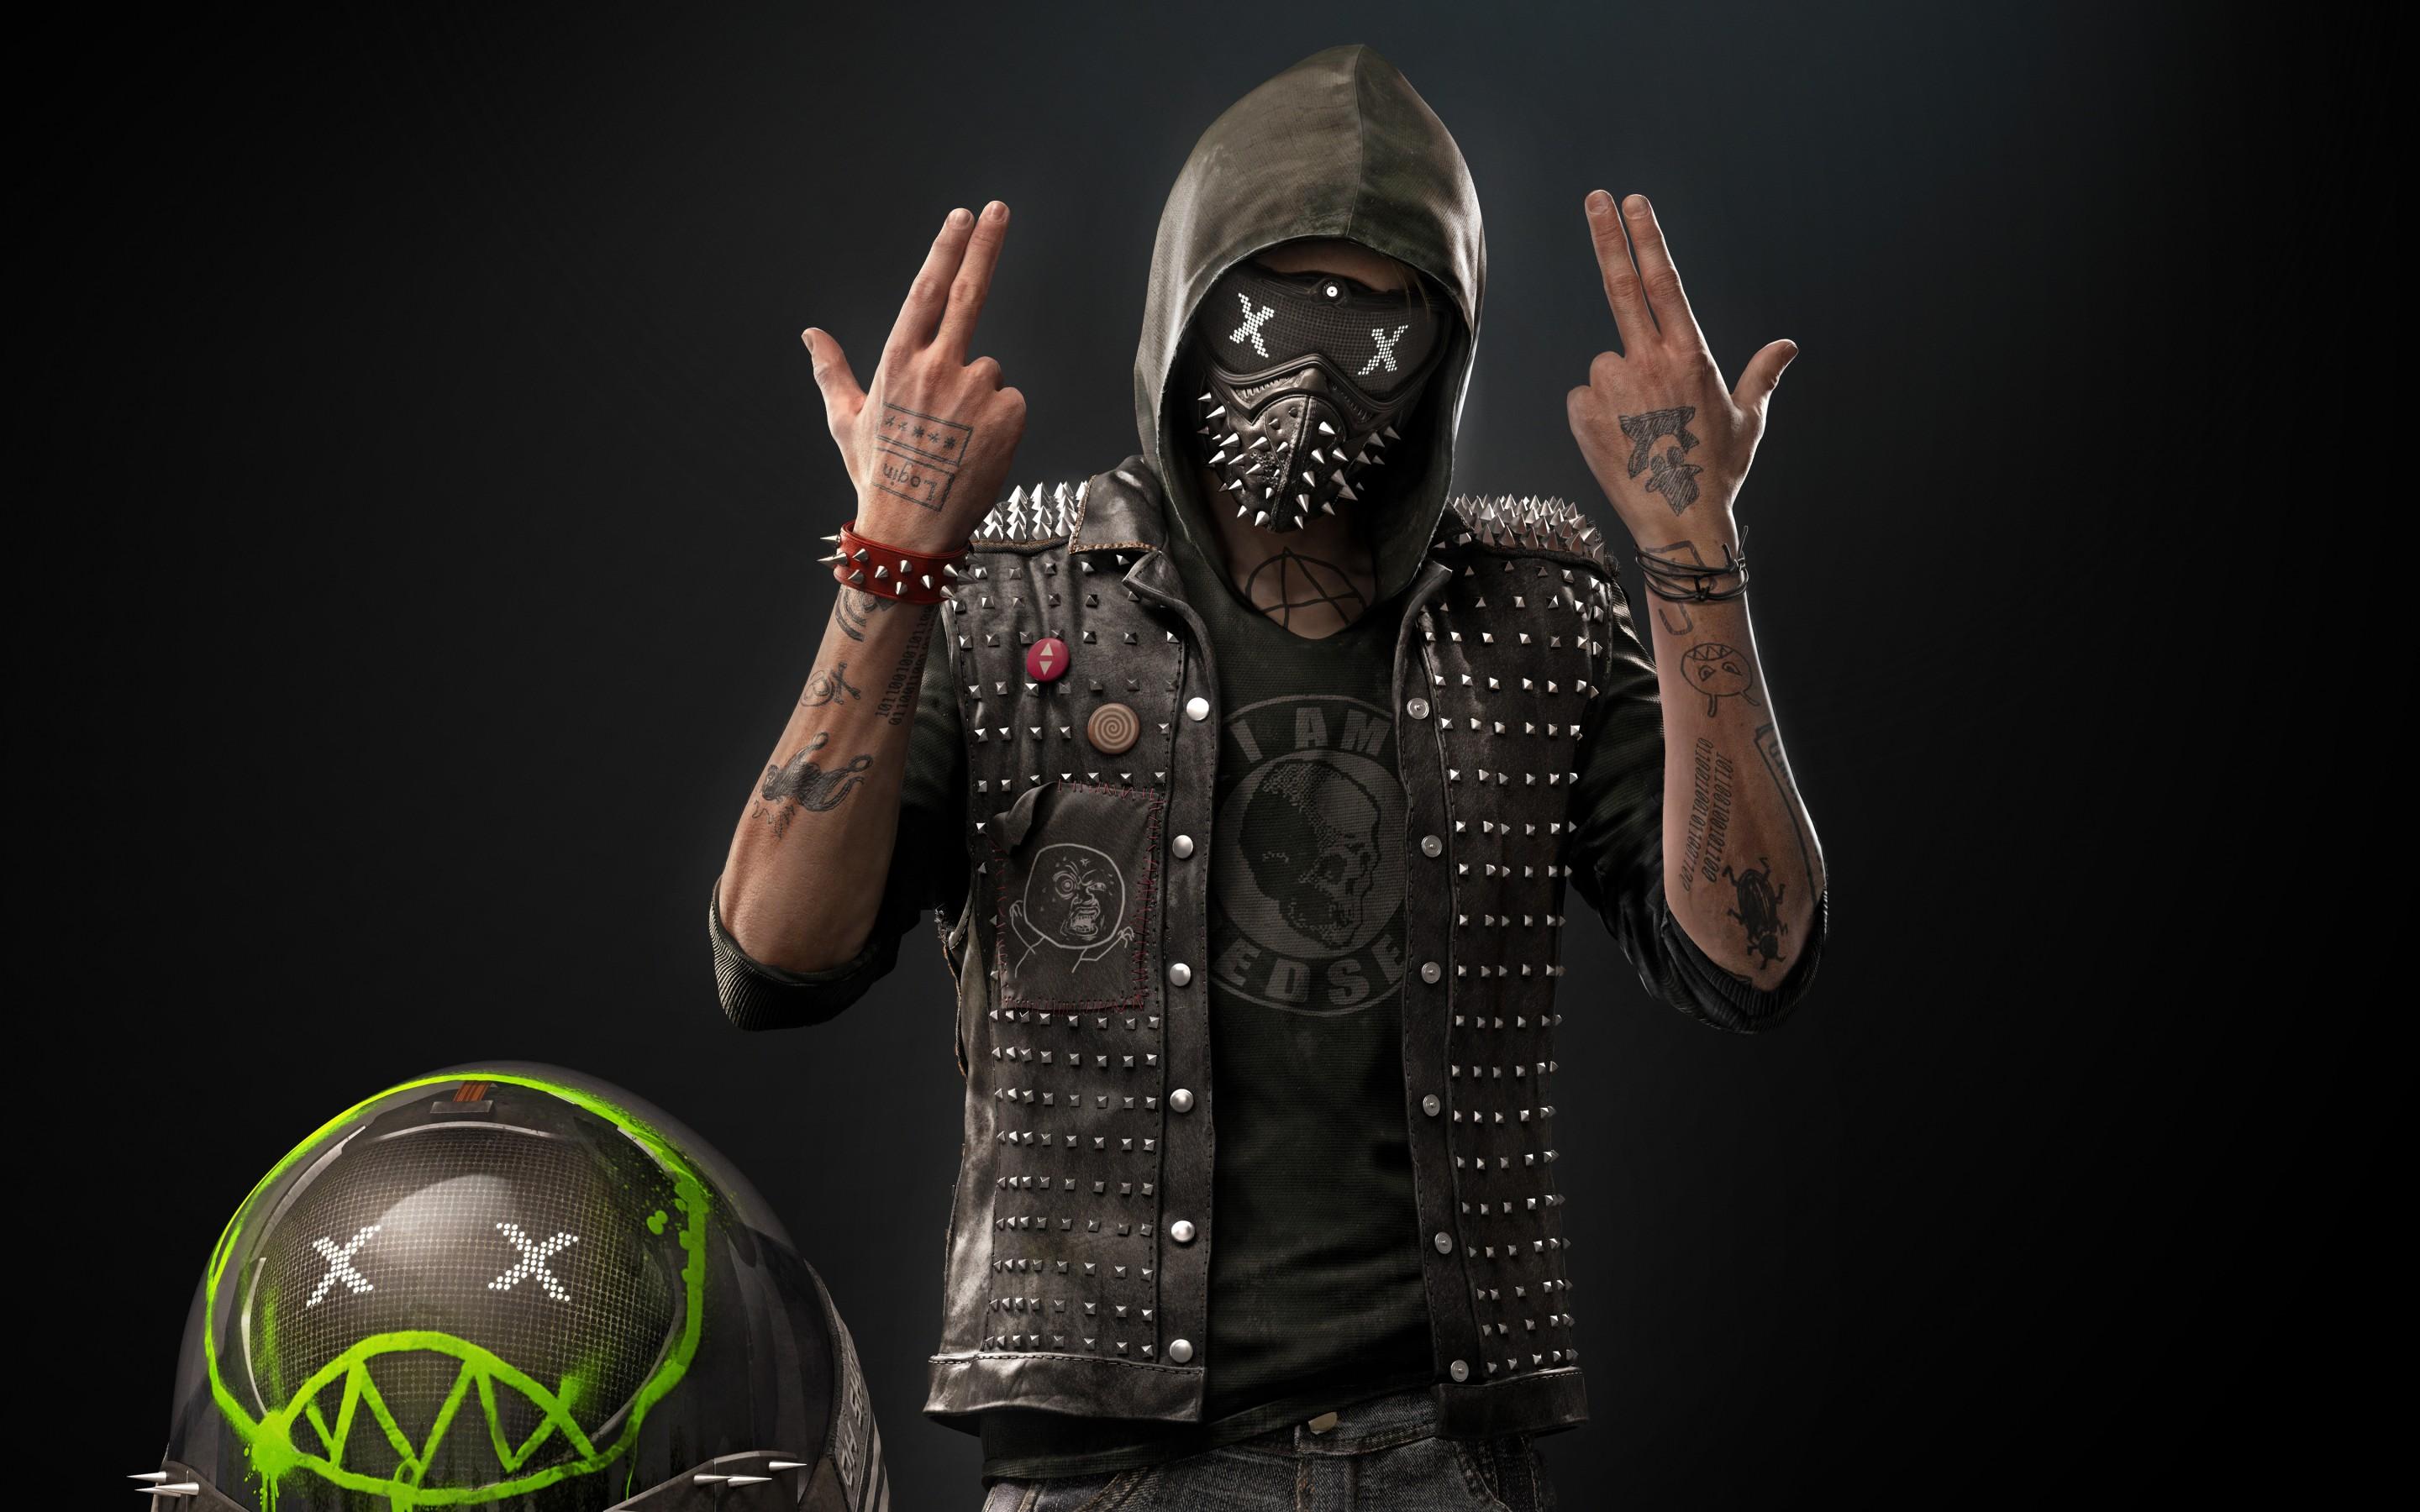 Watch Dogs 2 Wallpaper High Quality